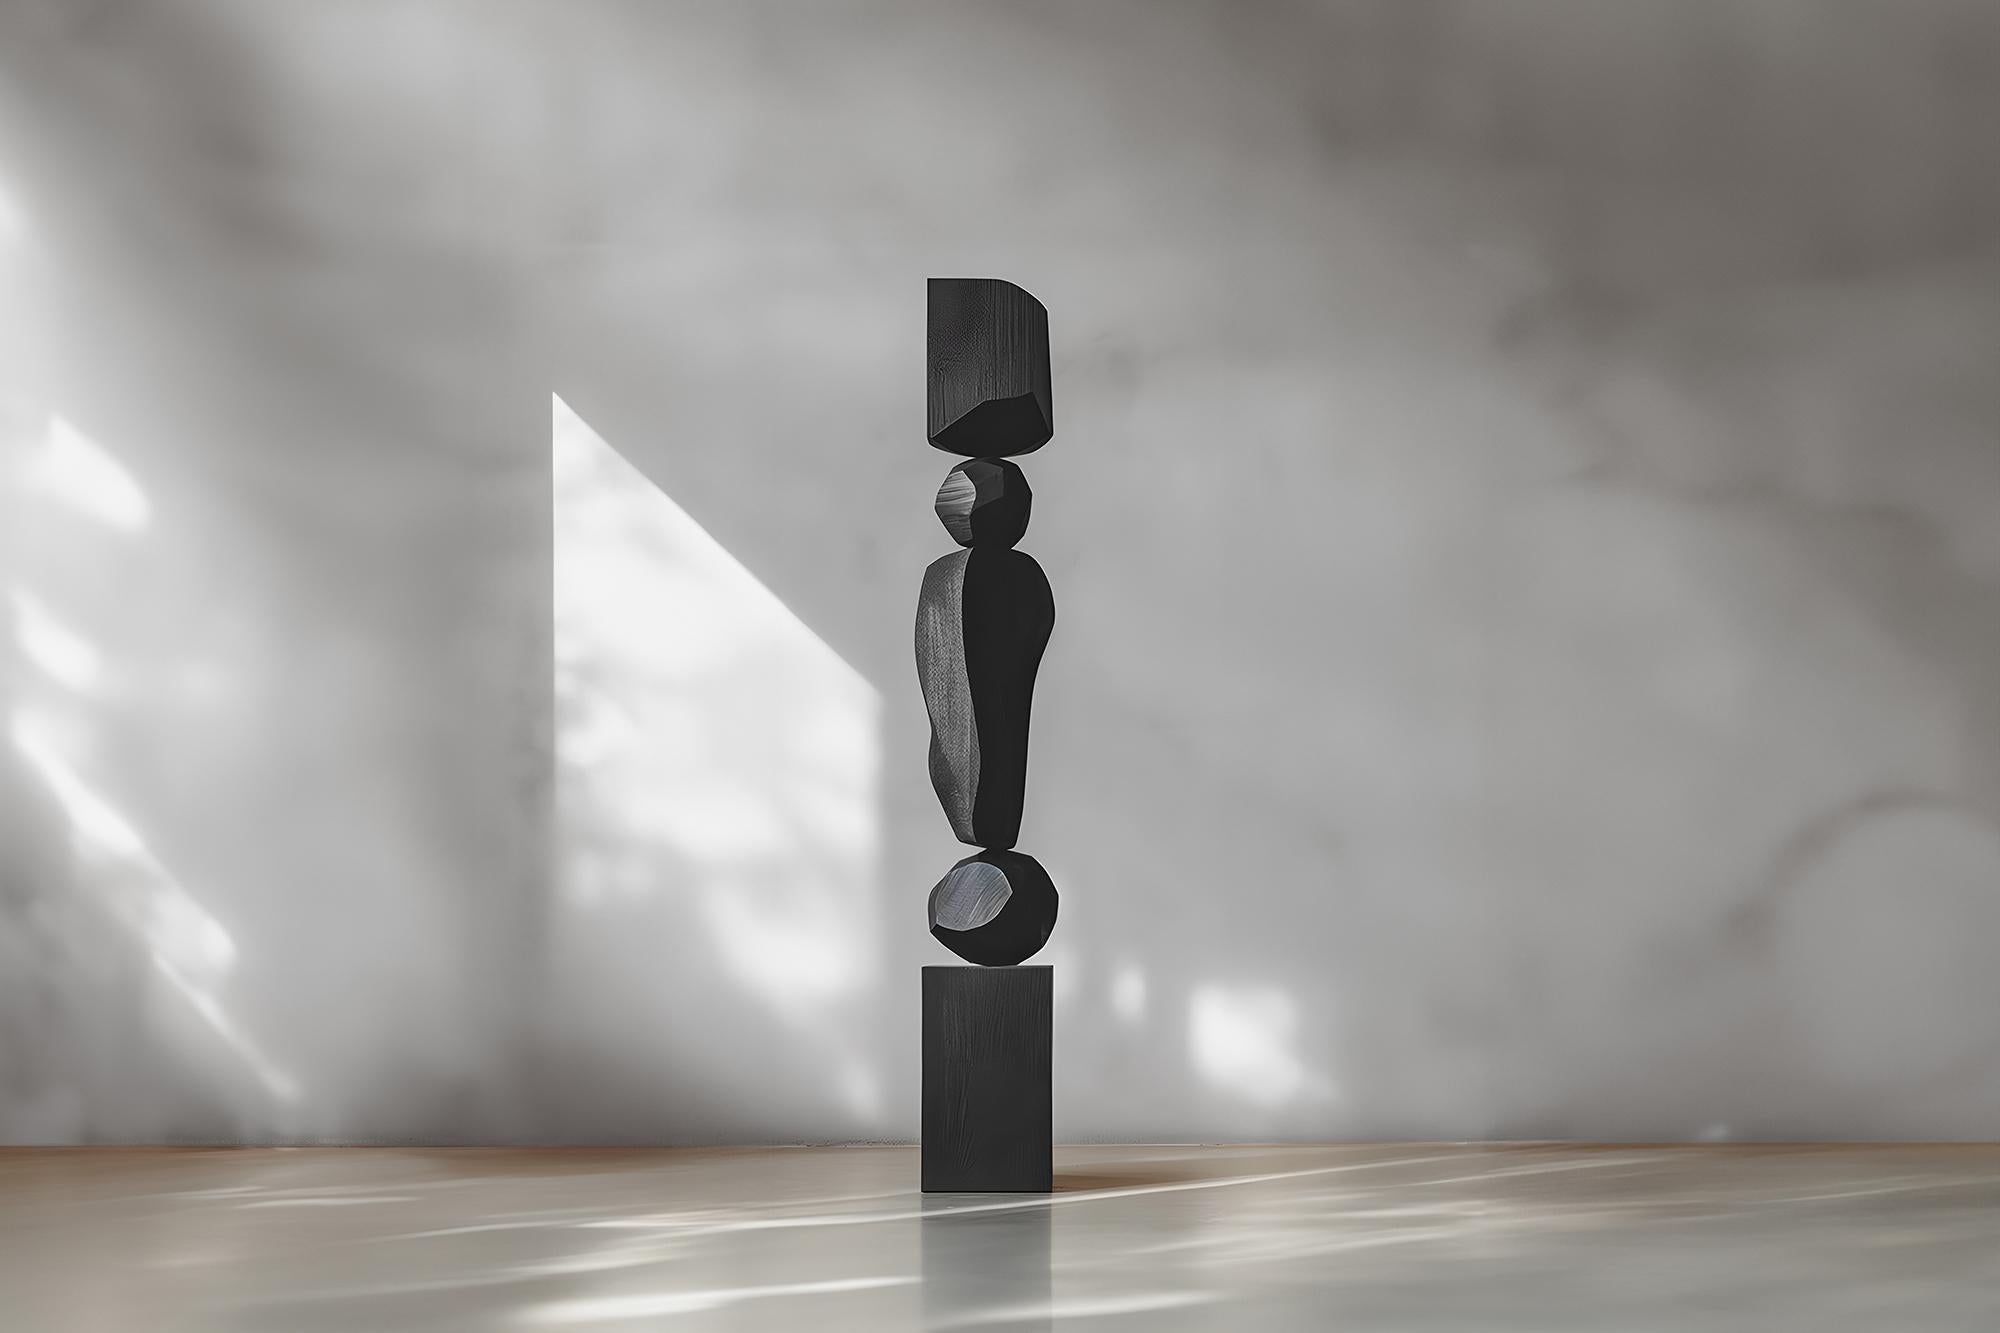 The Dark Elegance of Abstract Black Solid Wood Captured by Escalona, Still Stand No102

——

Joel Escalona's wooden standing sculptures are objects of raw beauty and serene grace. Each one is a testament to the power of the material, with smooth